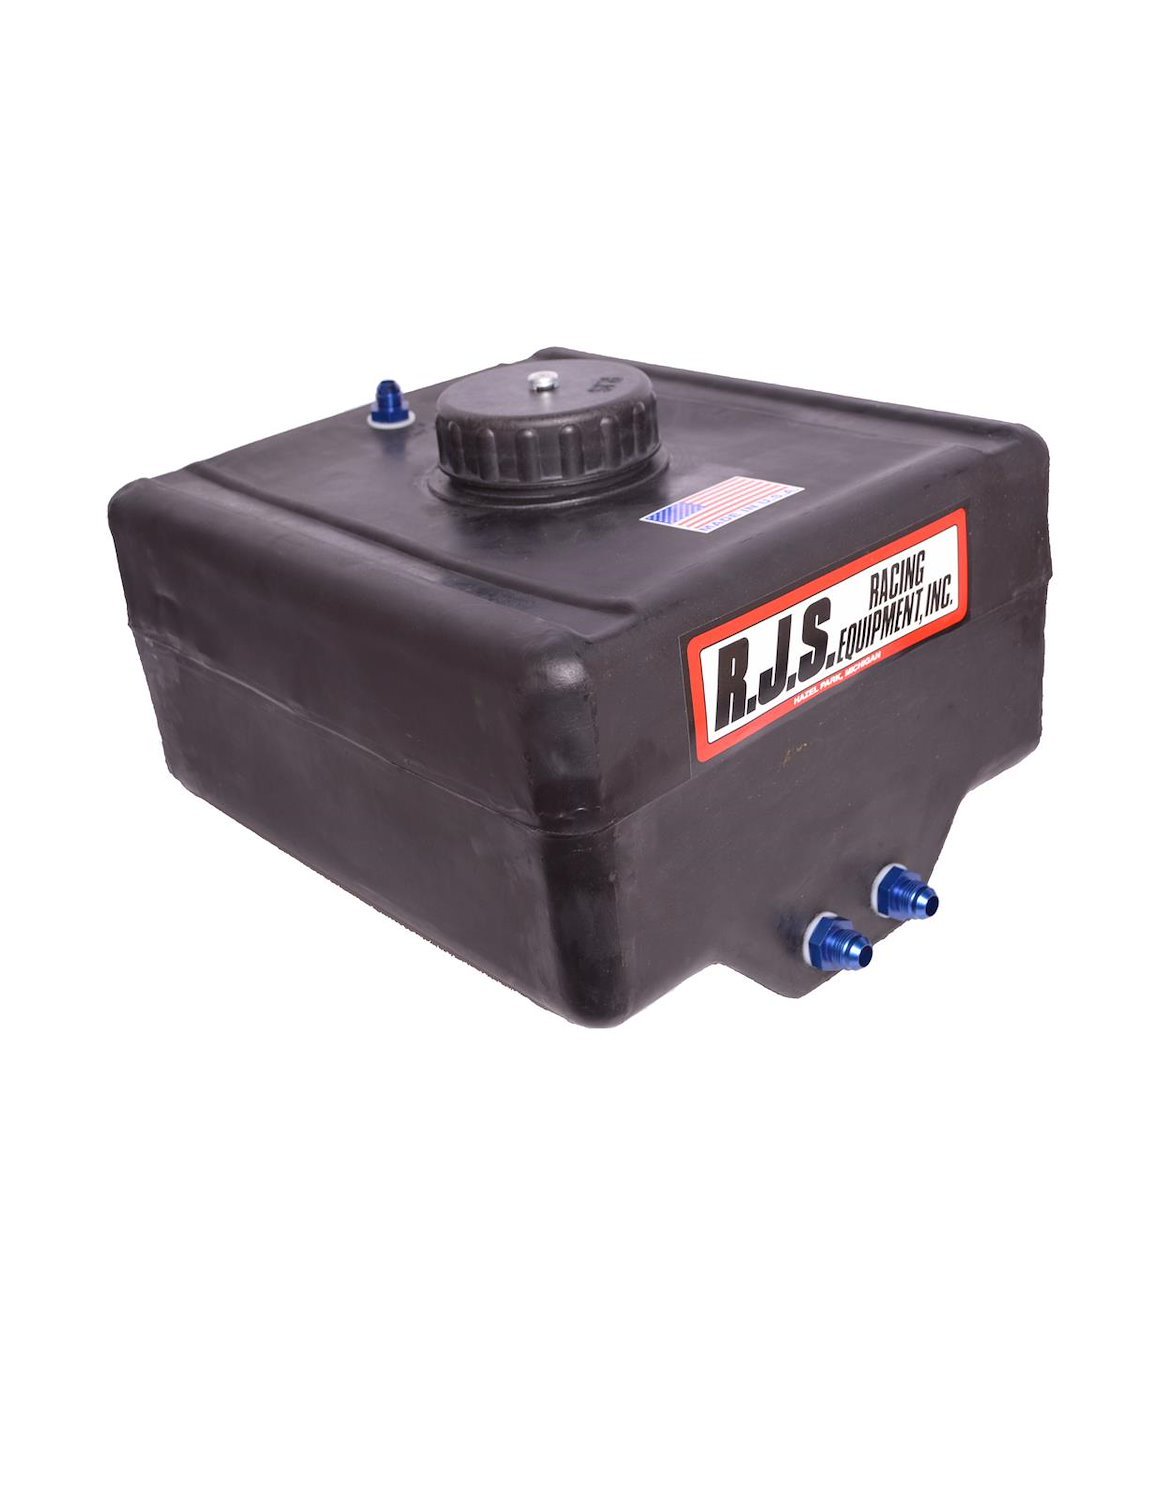 12 Gallon Drag Fuel Cell with Aircraft Style